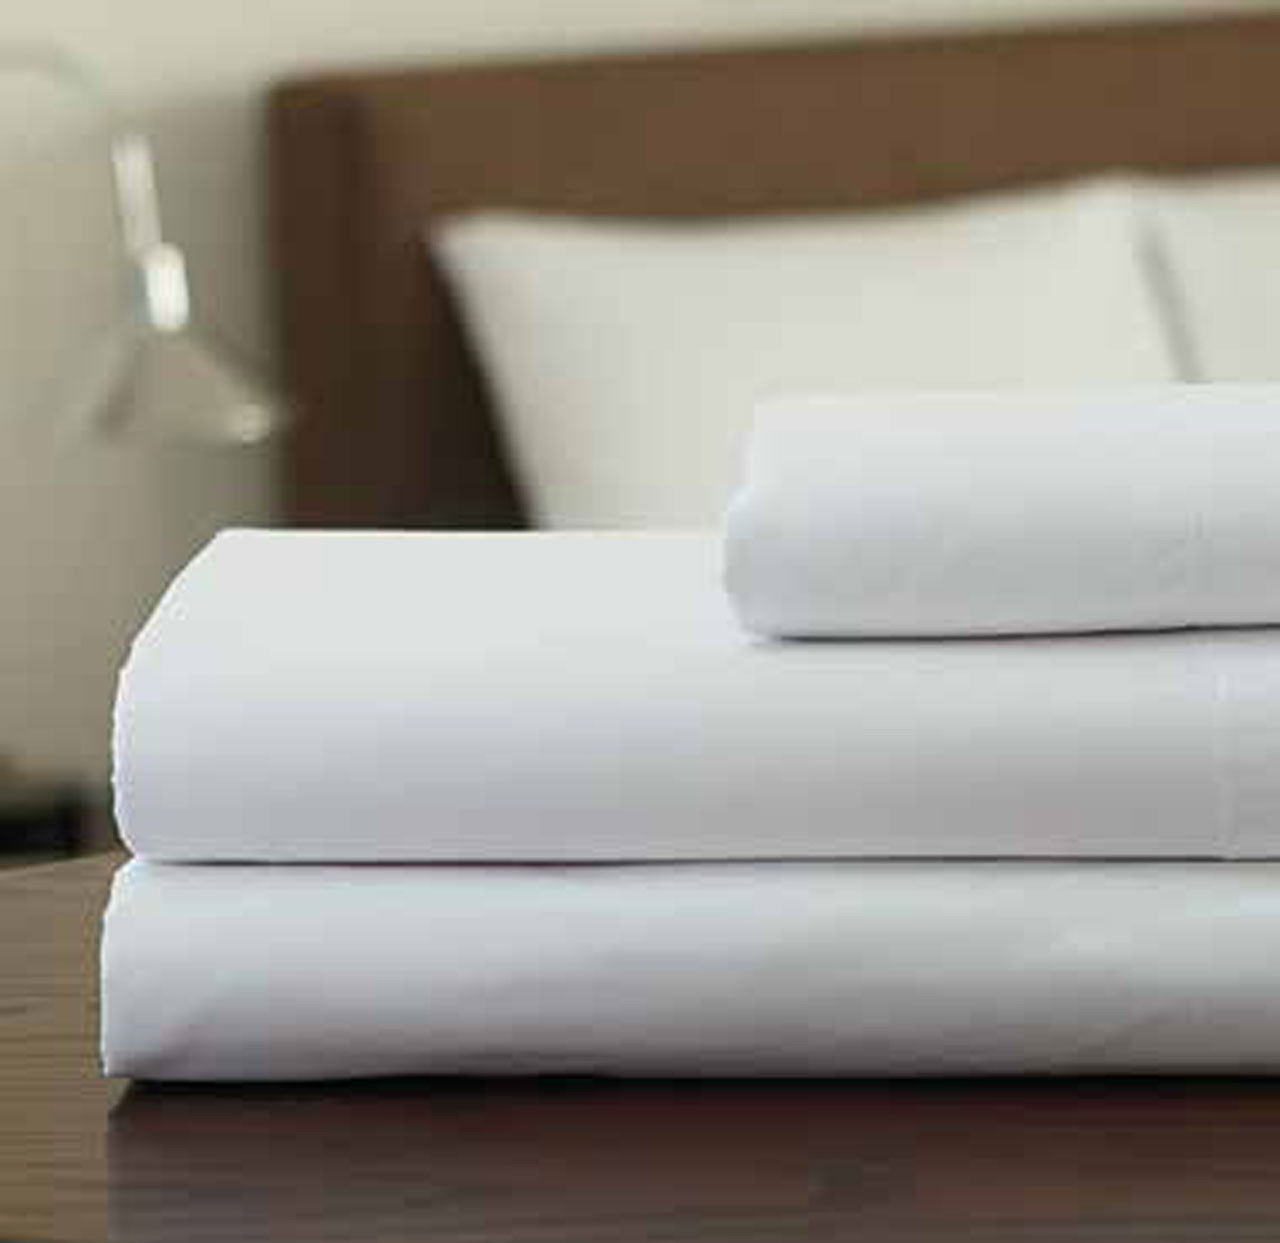 What is the thread count of the Weave Welspun sheets?